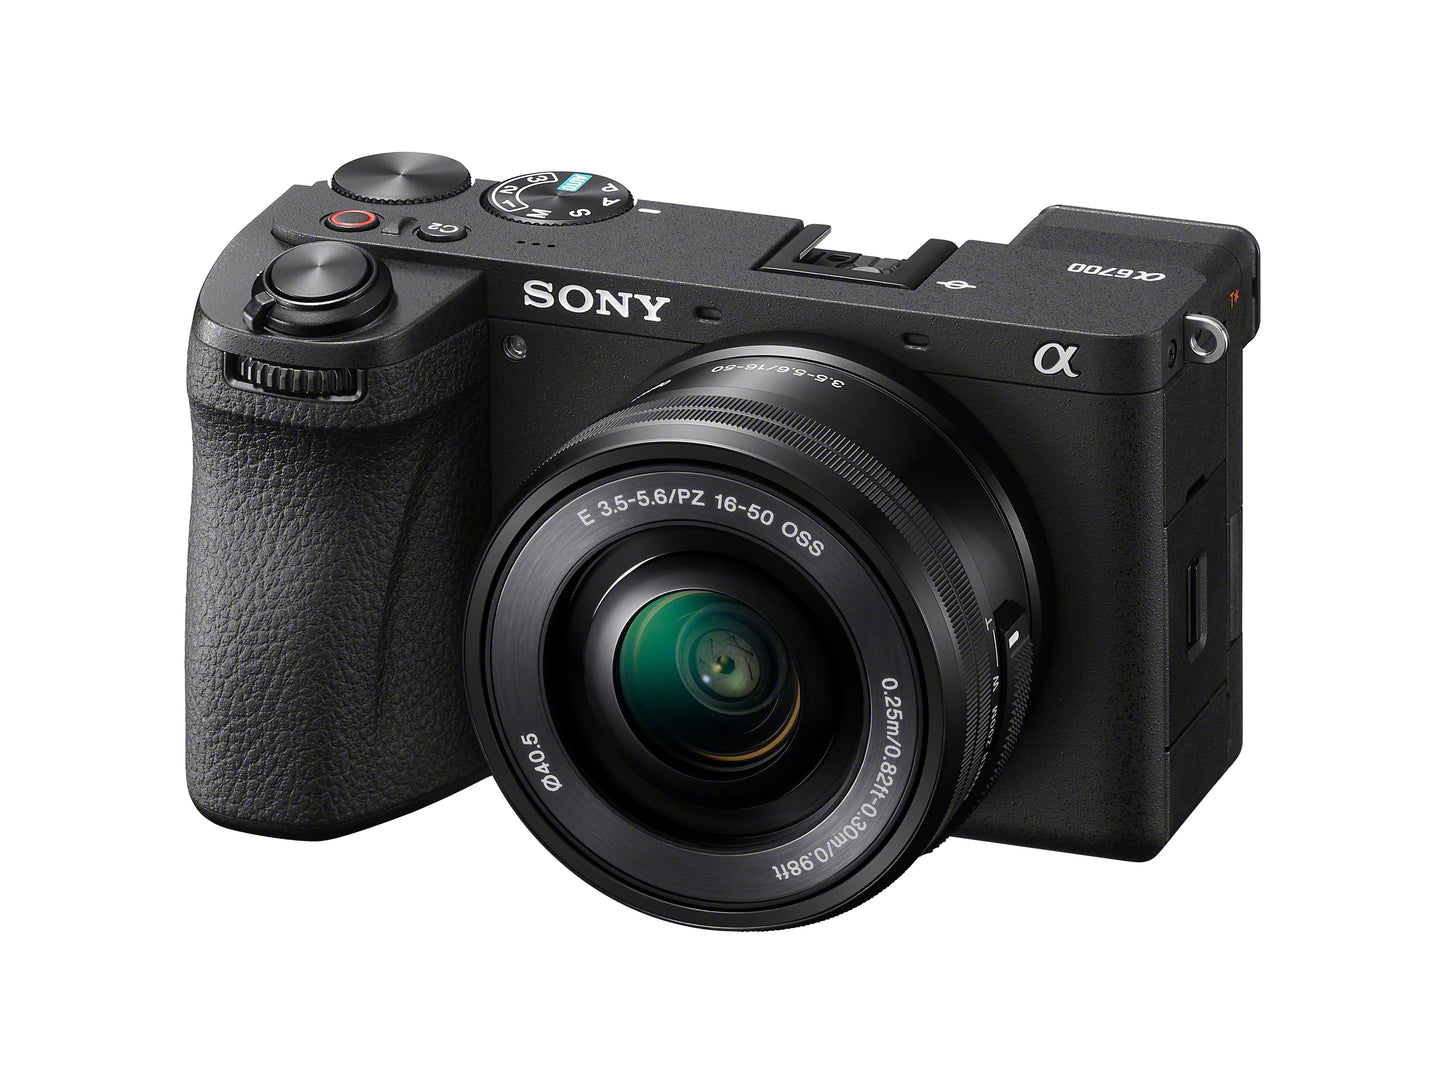 Sony a6700 Mirrorless APS-C Camera with 16-50mm Lens